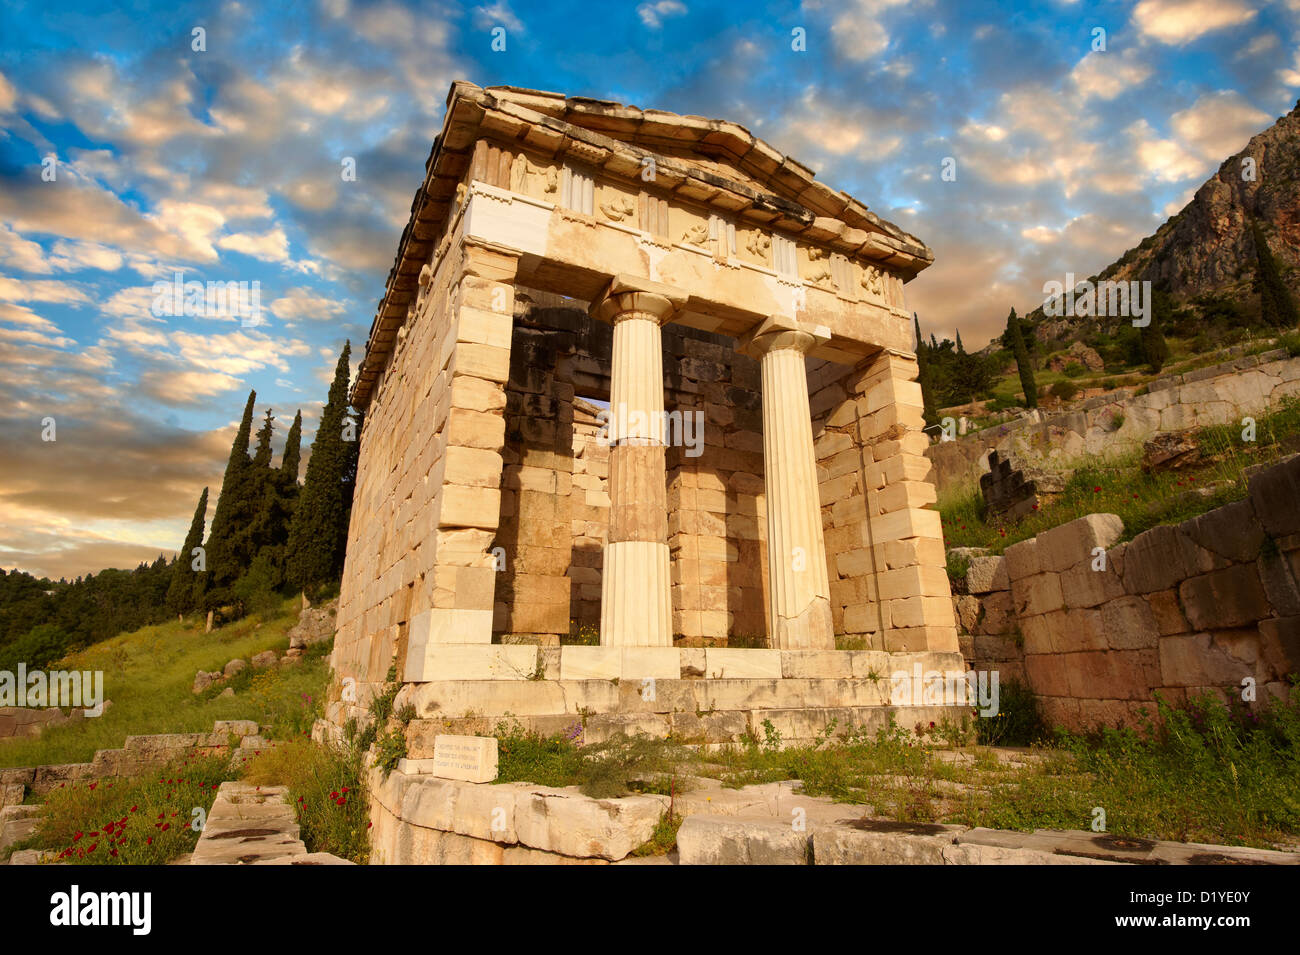 The reconstructed Treasury of Athens, built to commemorate their victory at the Battle of Marathon. Delphi, Stock Photo